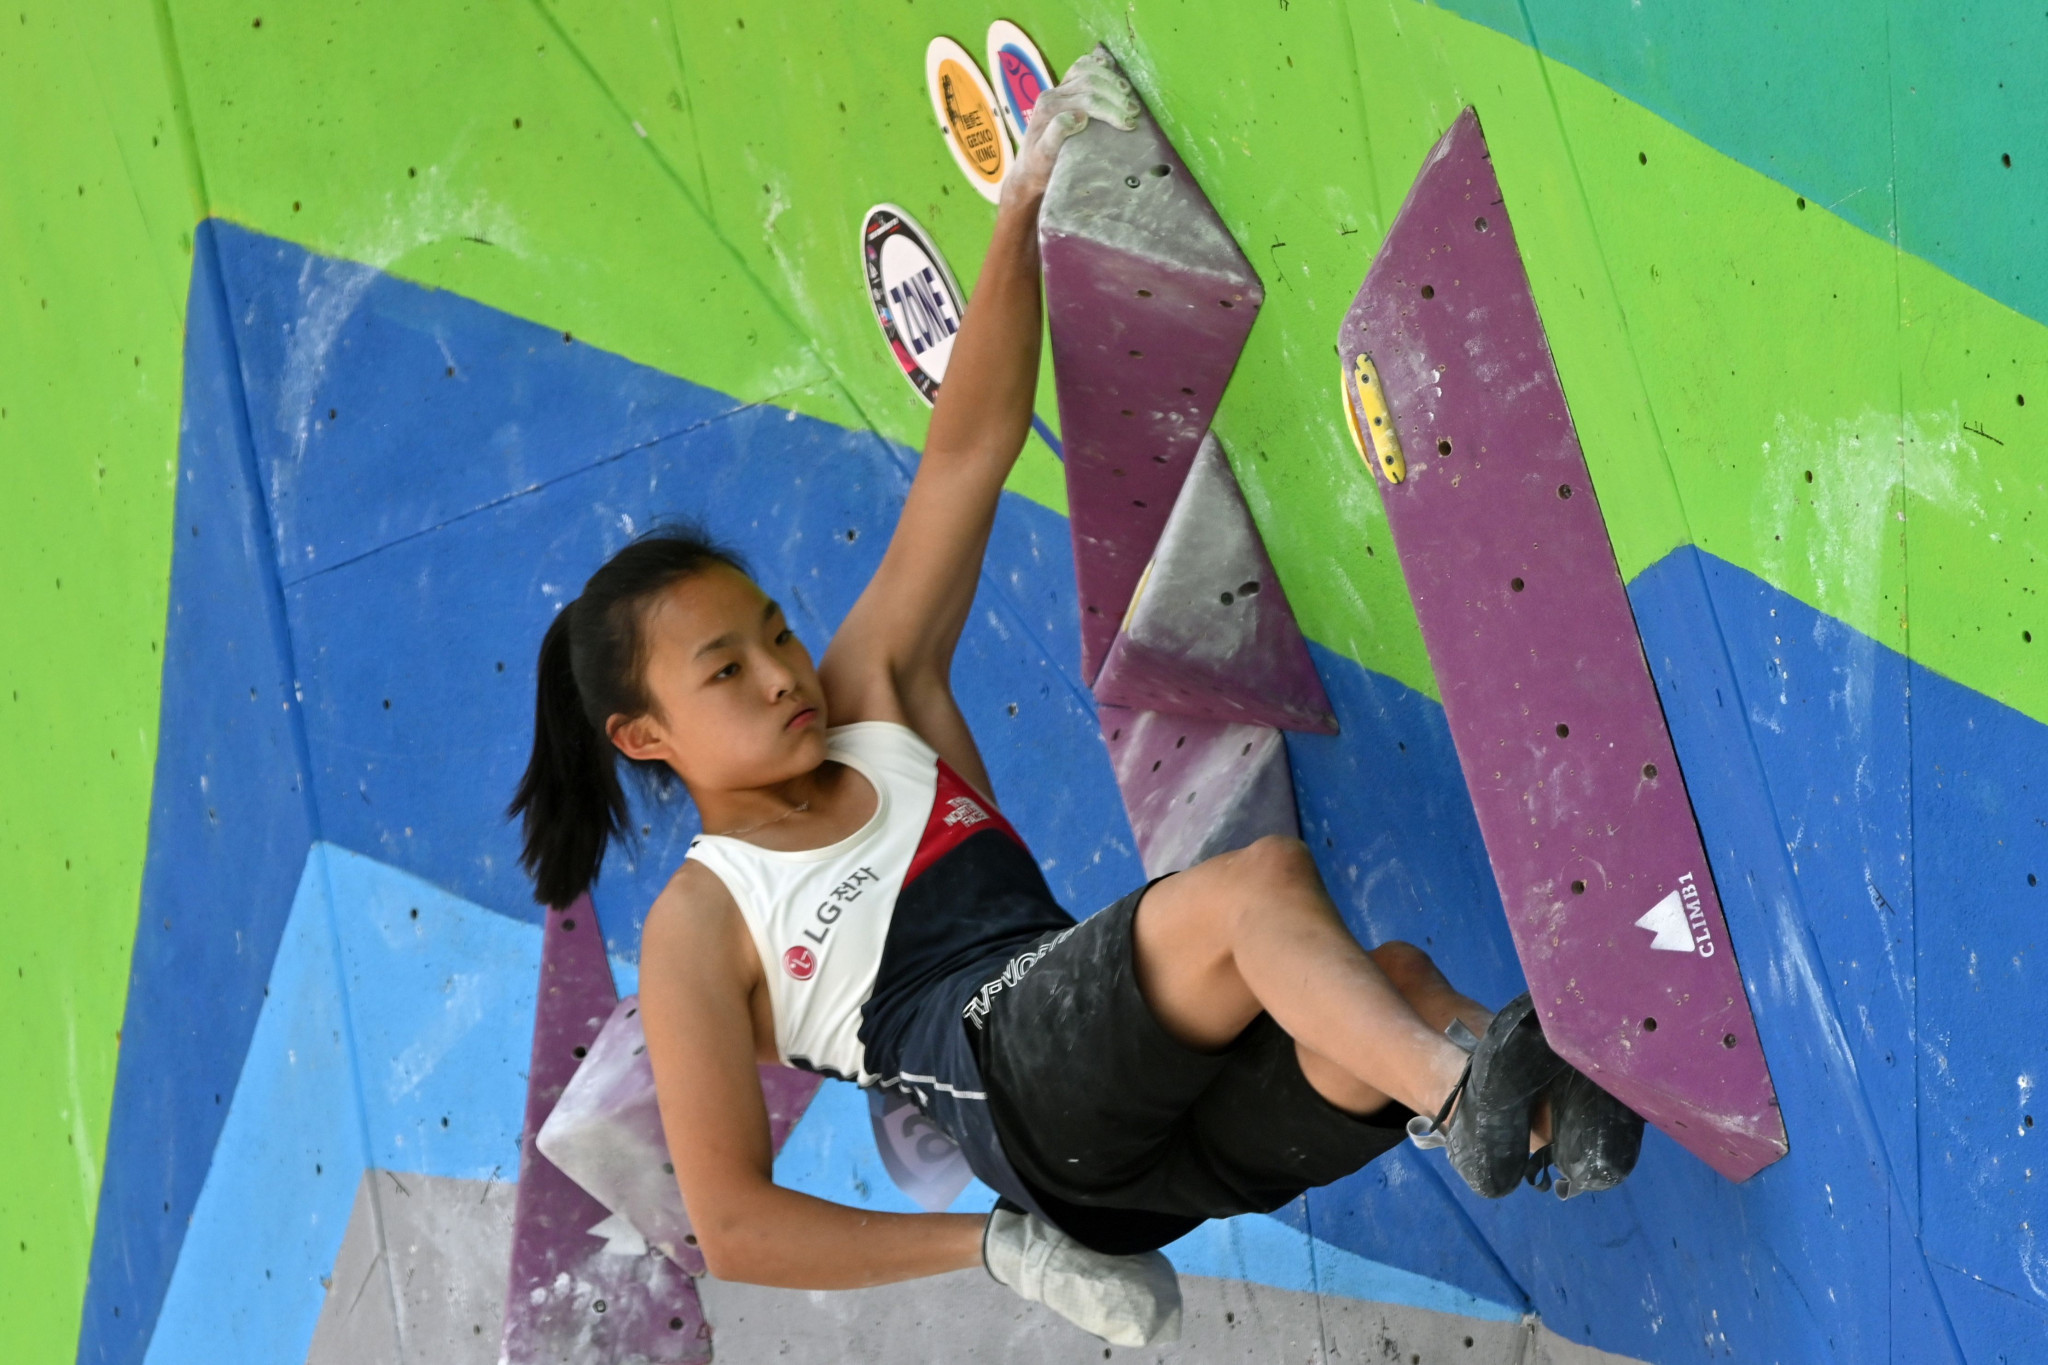 The 17-year-old Seo Chae-hyun was allocated a quota place for the Tokyo 2020 sport climbing contest ©Getty Images